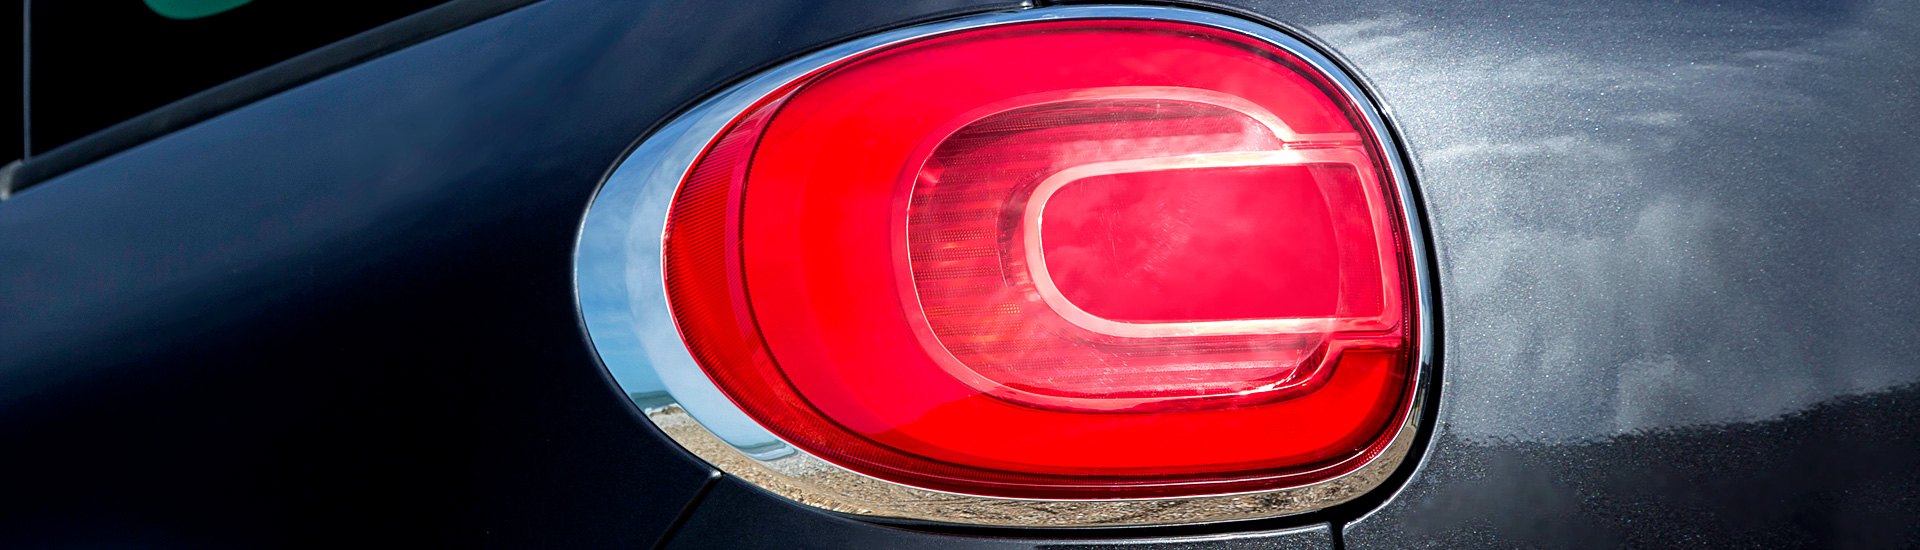 New Tail Lights By Replace For a Wide Range of Models